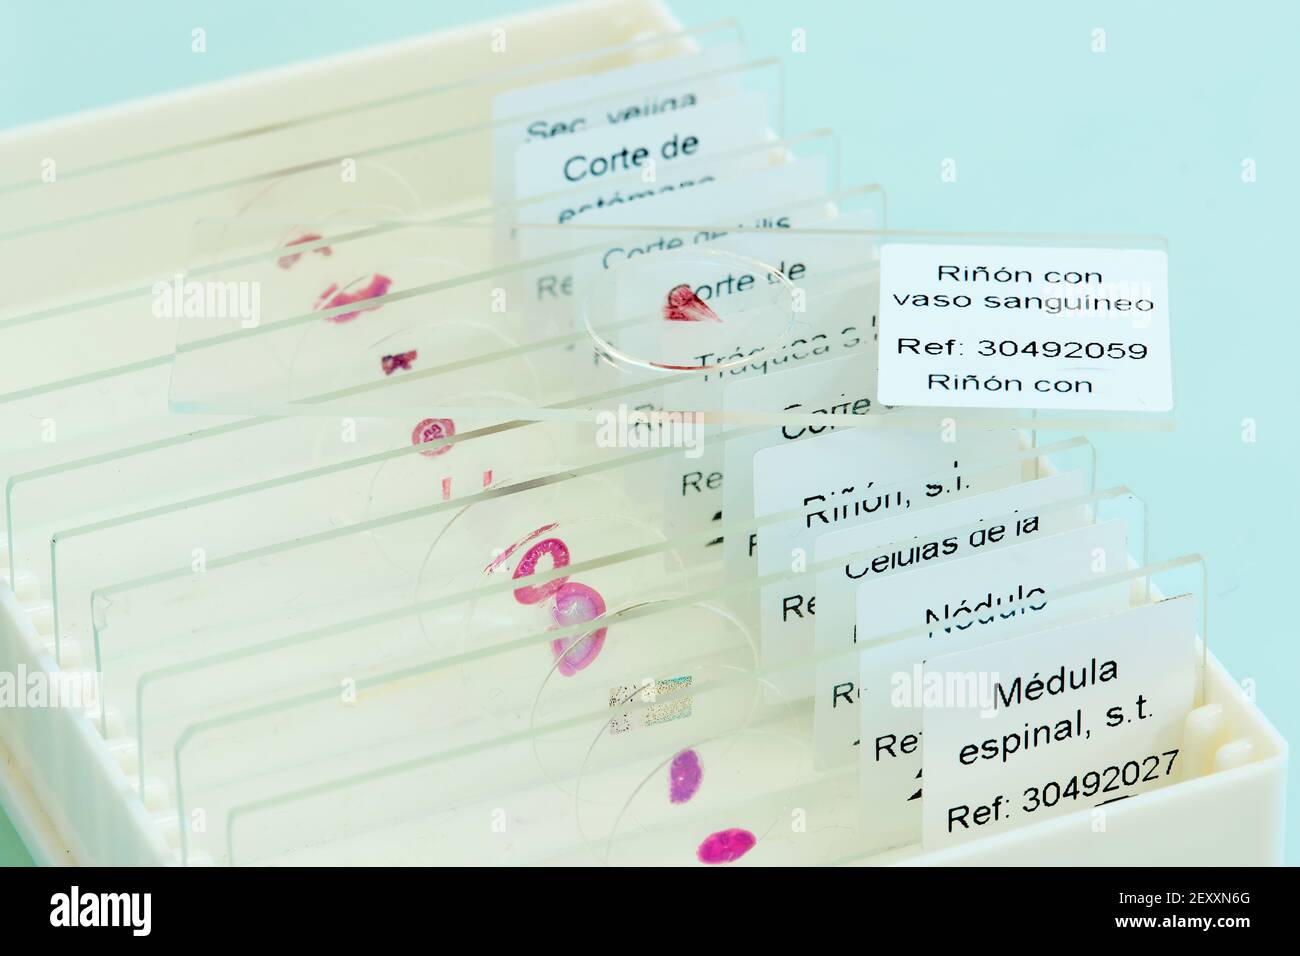 Slides with tissue samples in a medical laboratory. Basque Country, Spain, Europe. Stock Photo